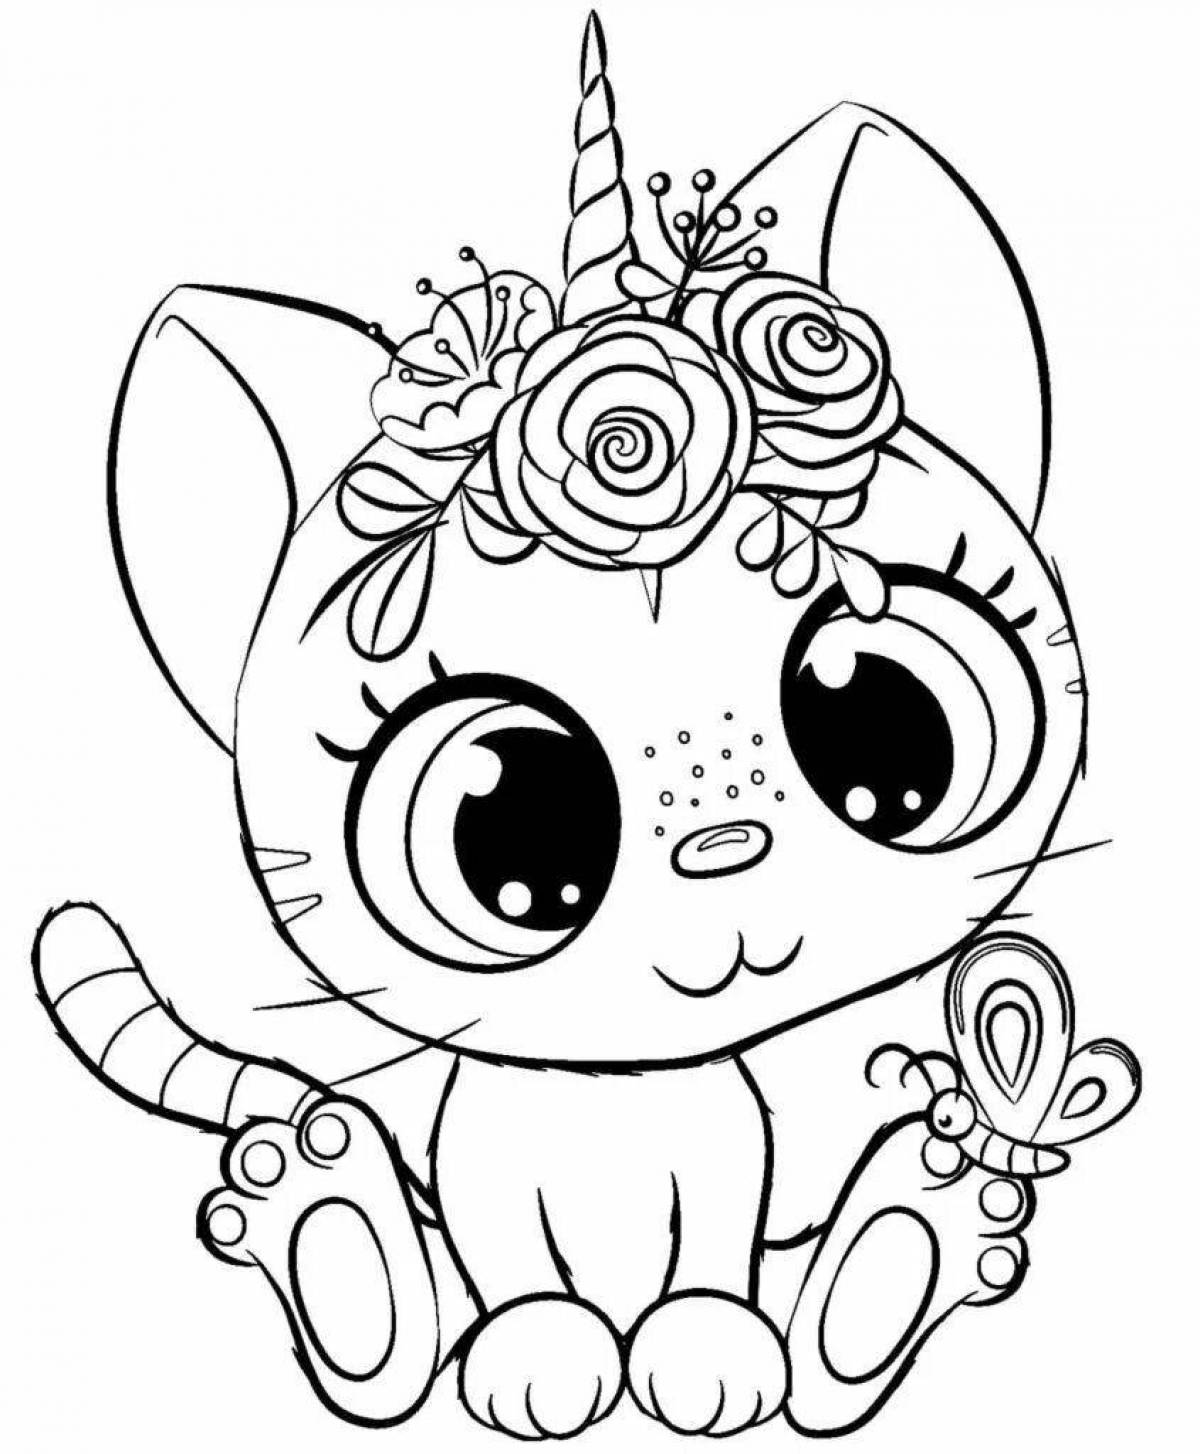 Adorable unicorn cat coloring book for kids